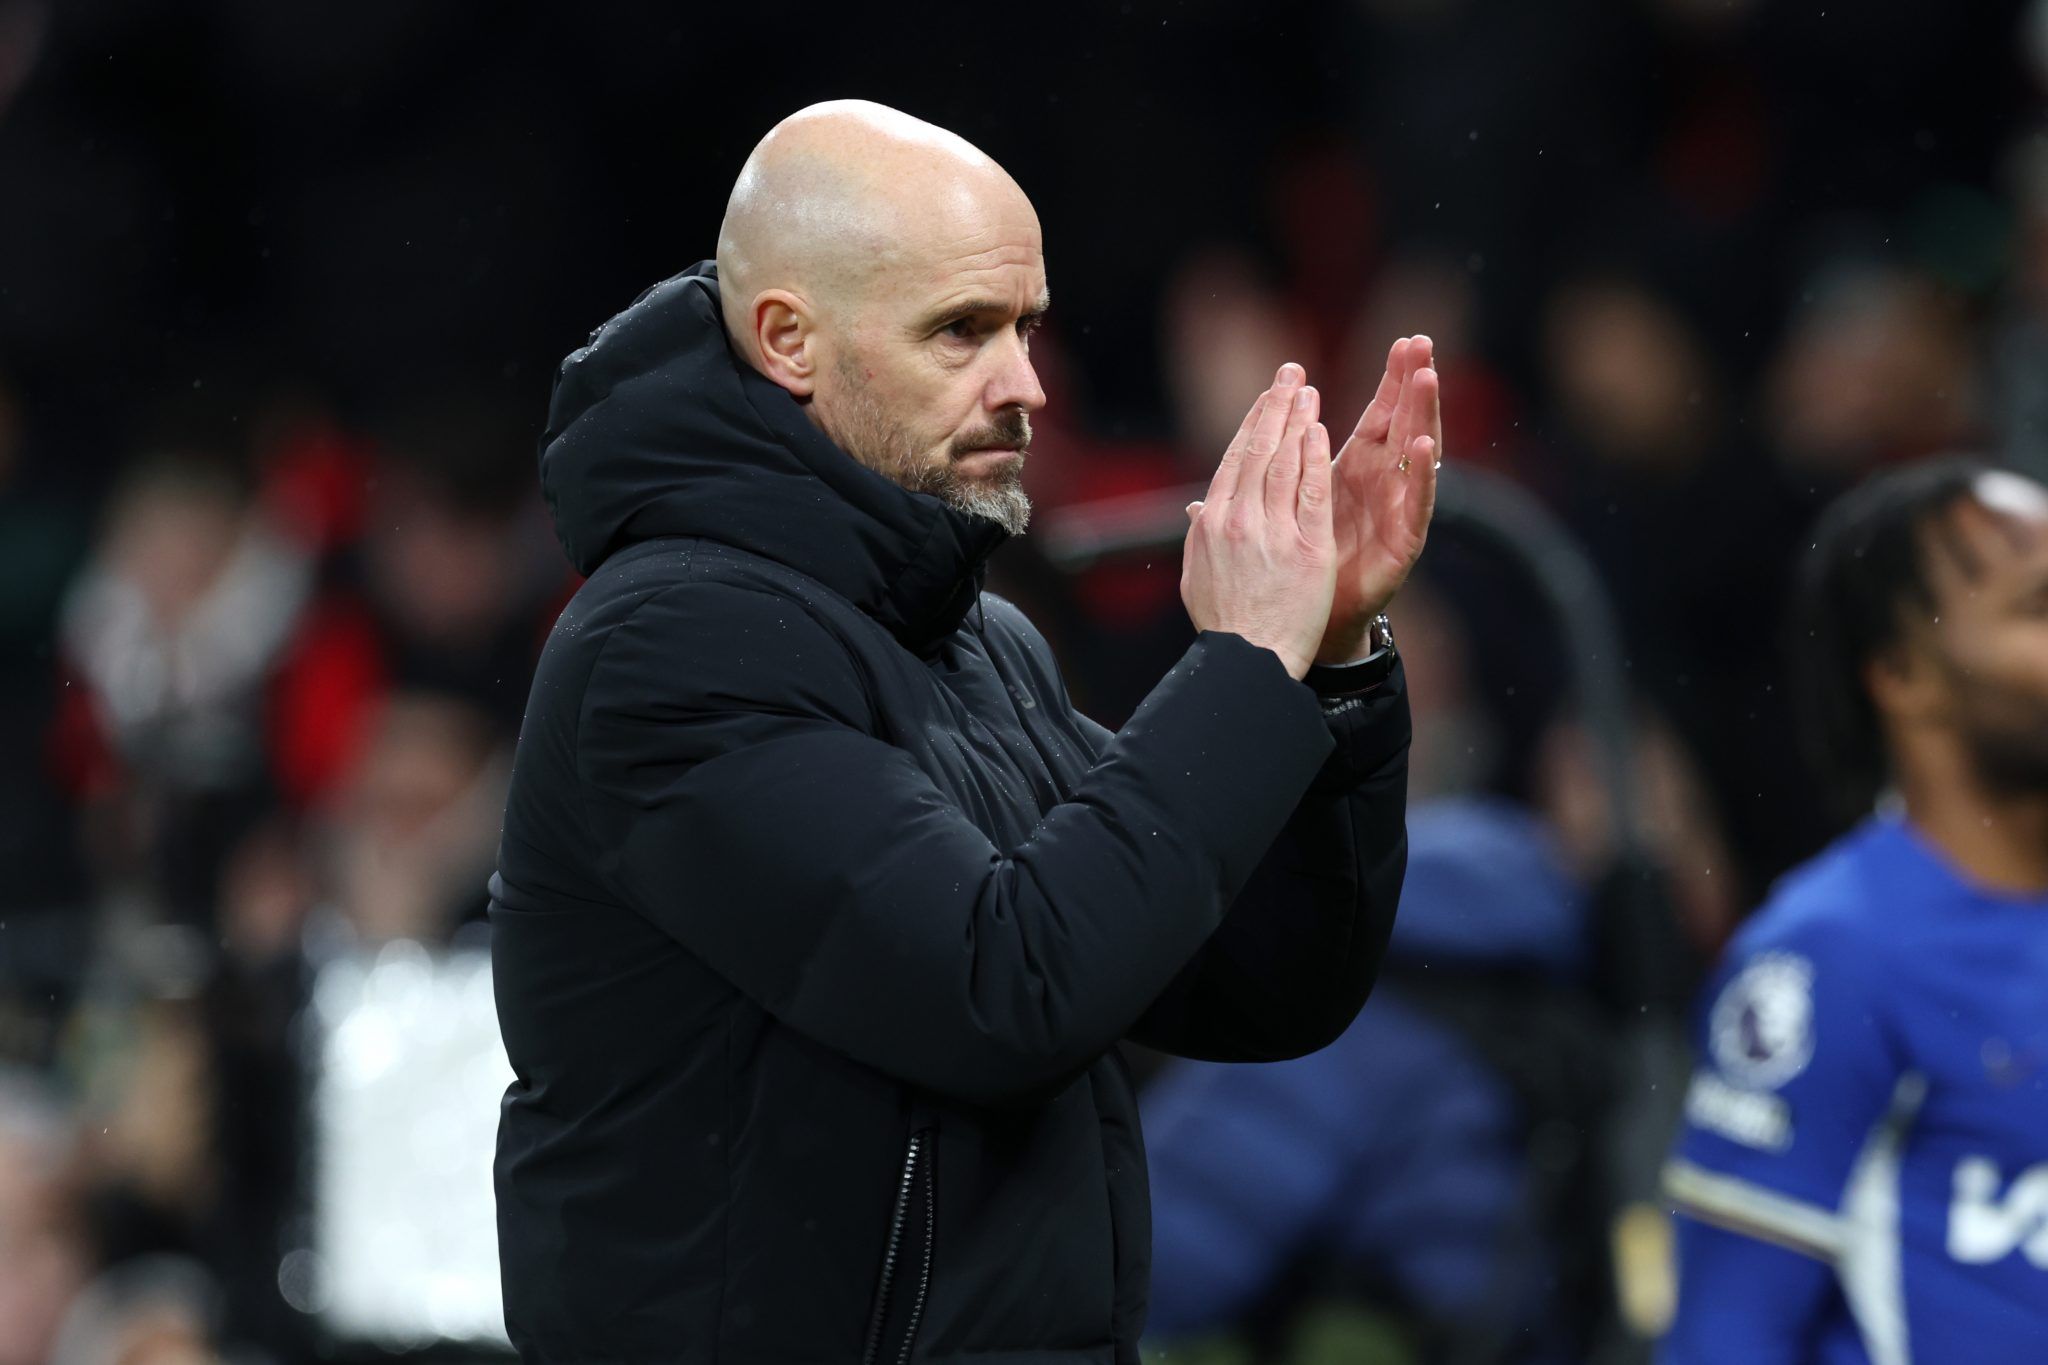 Ten Hag clapping at Man United fans 